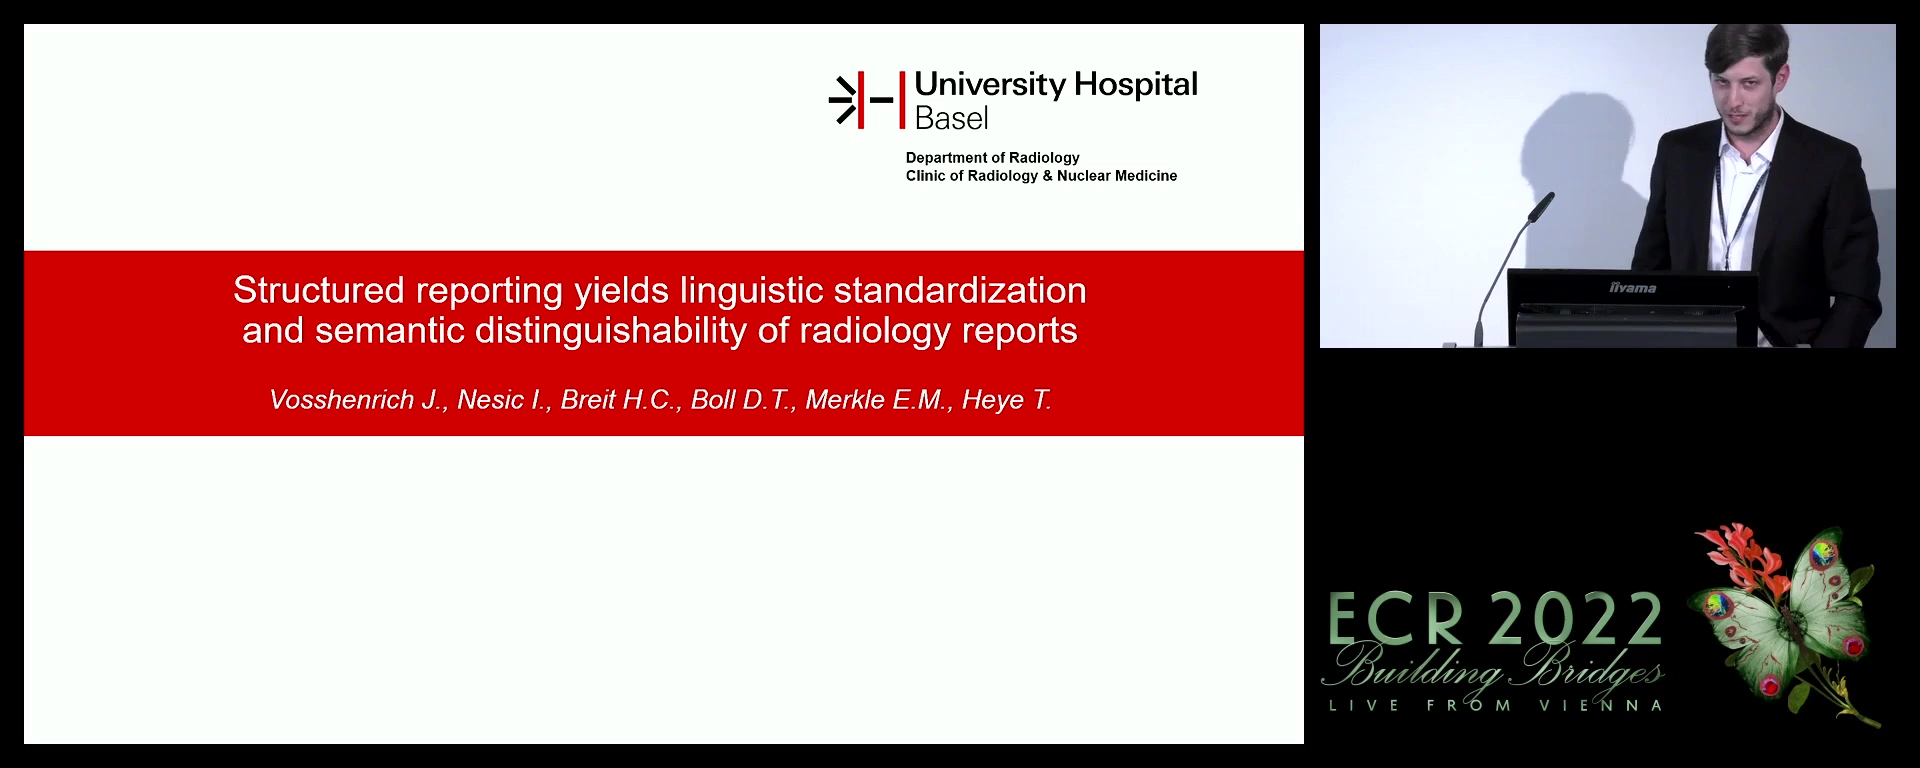 Structured reporting yields linguistic standardisation and semantic distinguishability of radiology reports